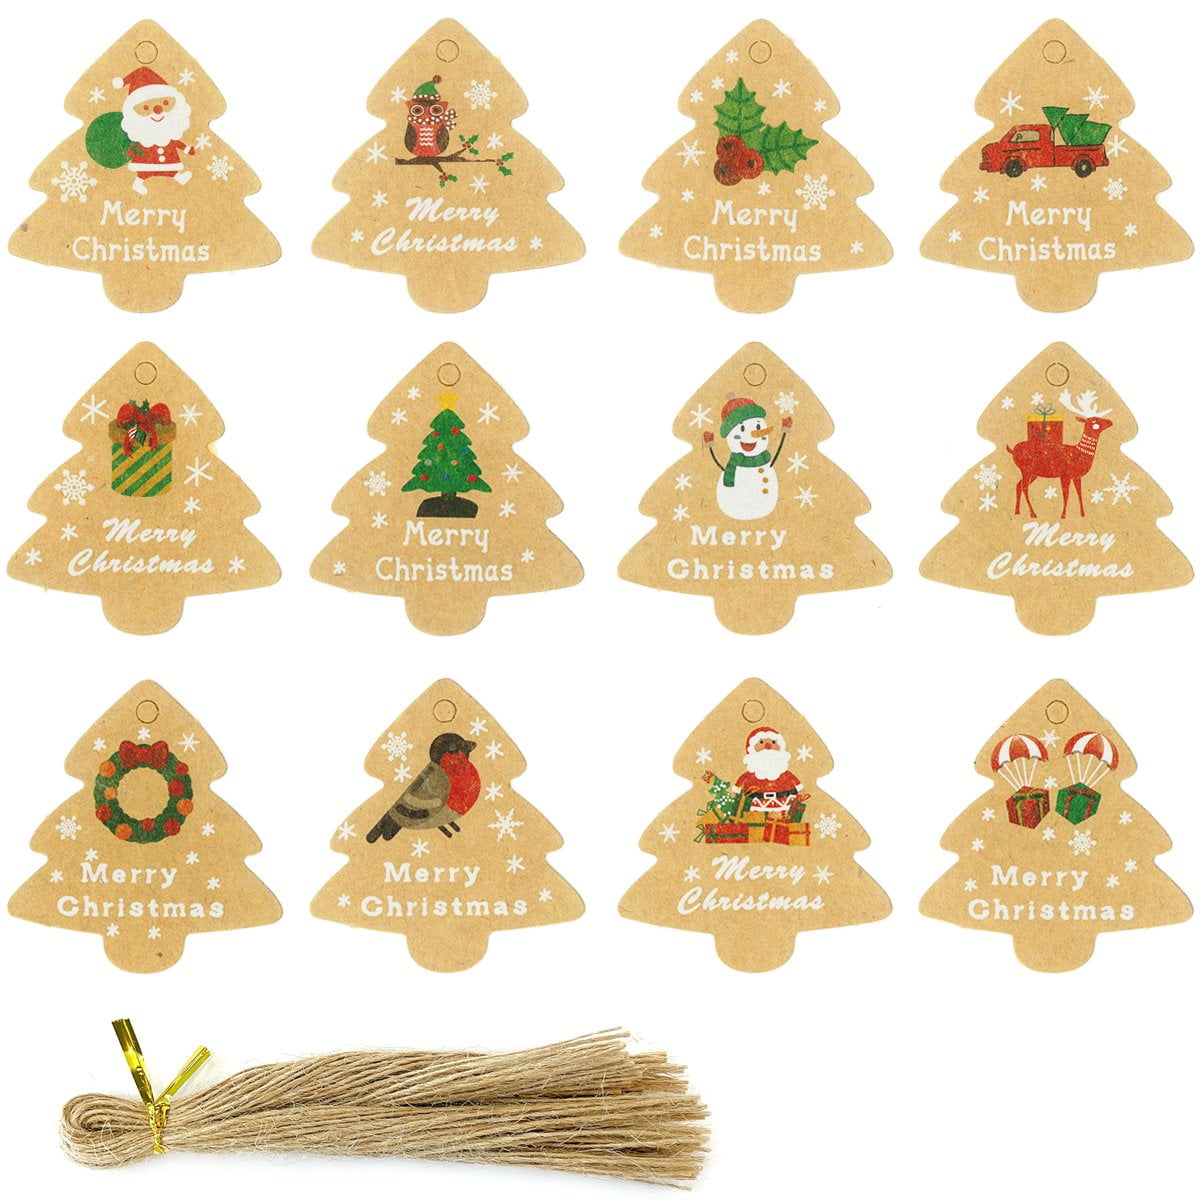 Wrapables Christmas Holiday Gift Tags/Kraft Hang Tags with Jute Strings for Gift-Wrapping, DIY, Arts & Crafts (50pcs) Holiday Assortment